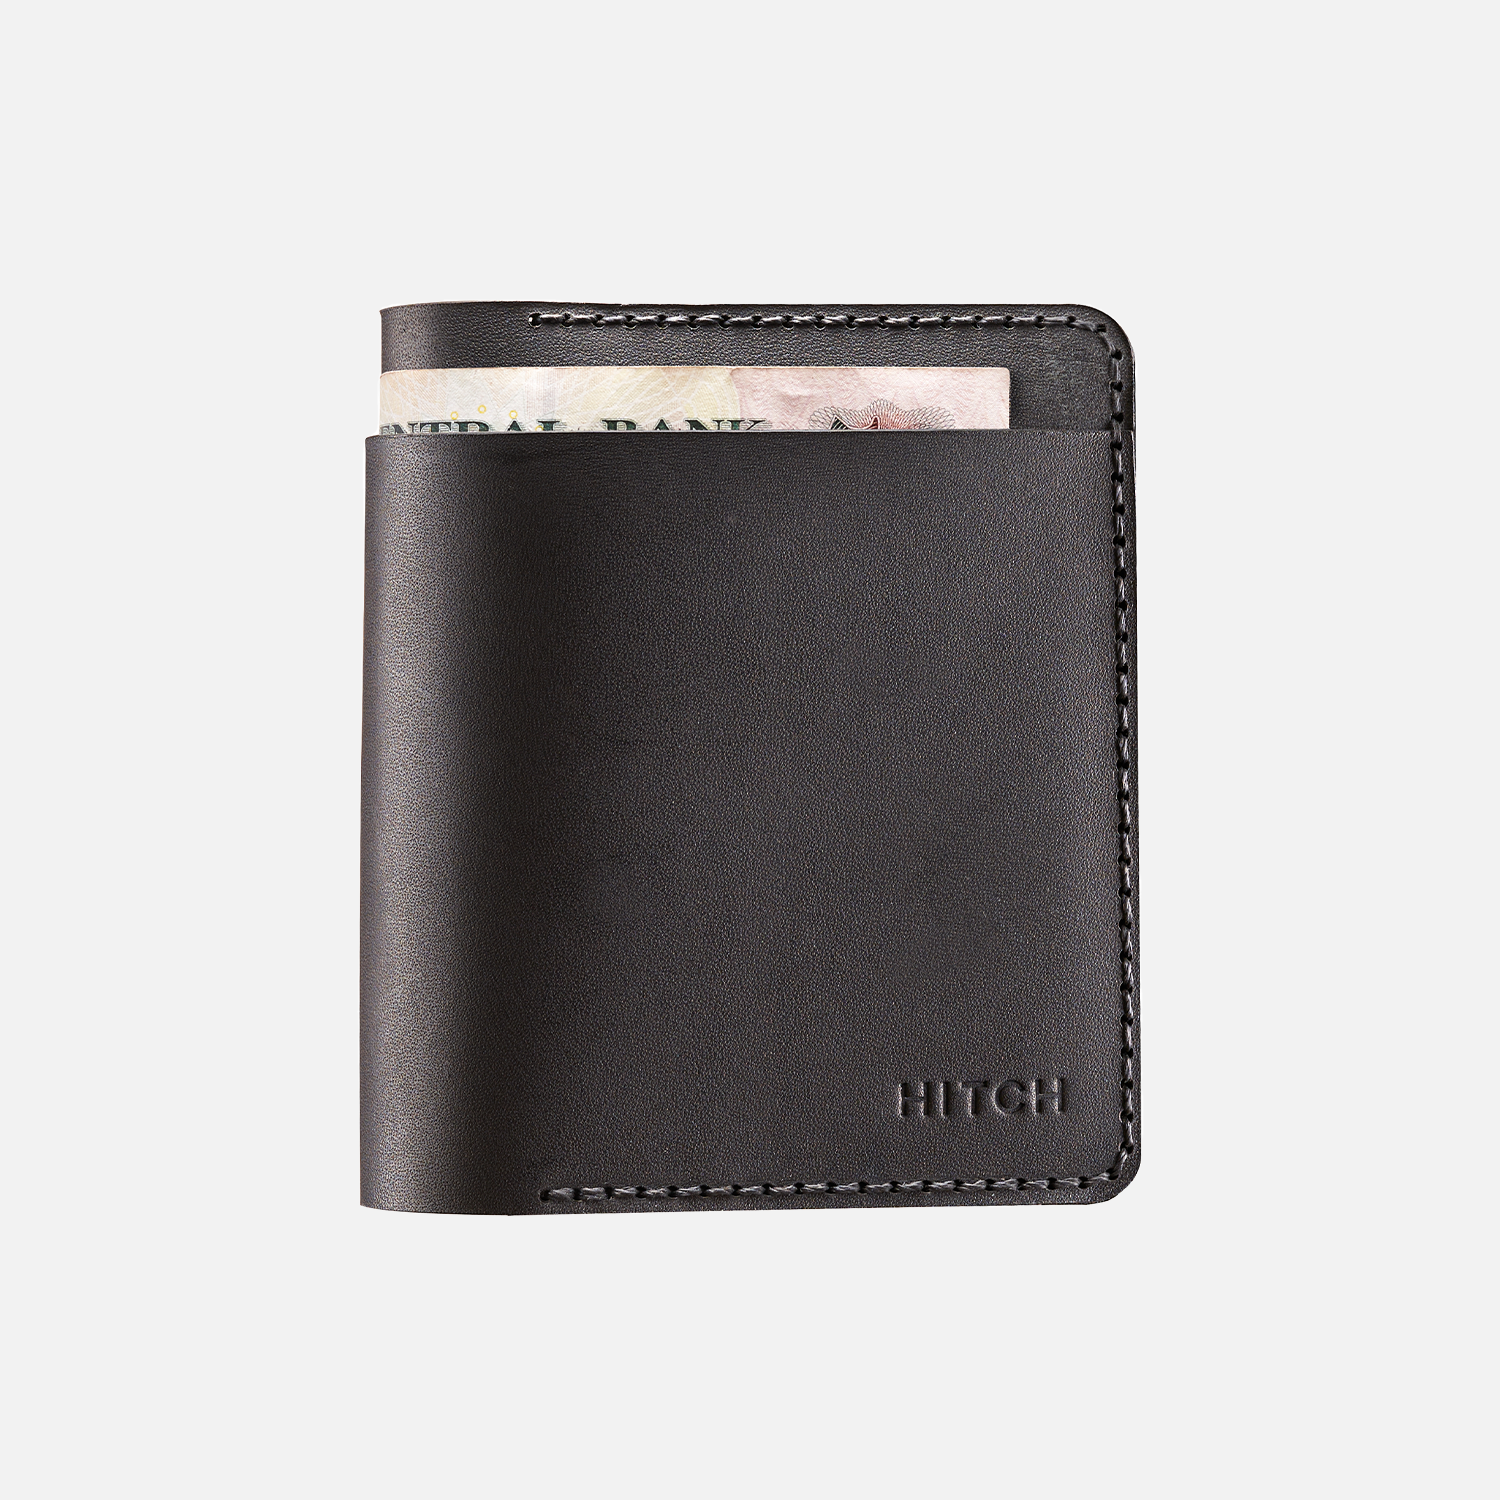 Black leather bifold wallet with cash peeking out on a white background.